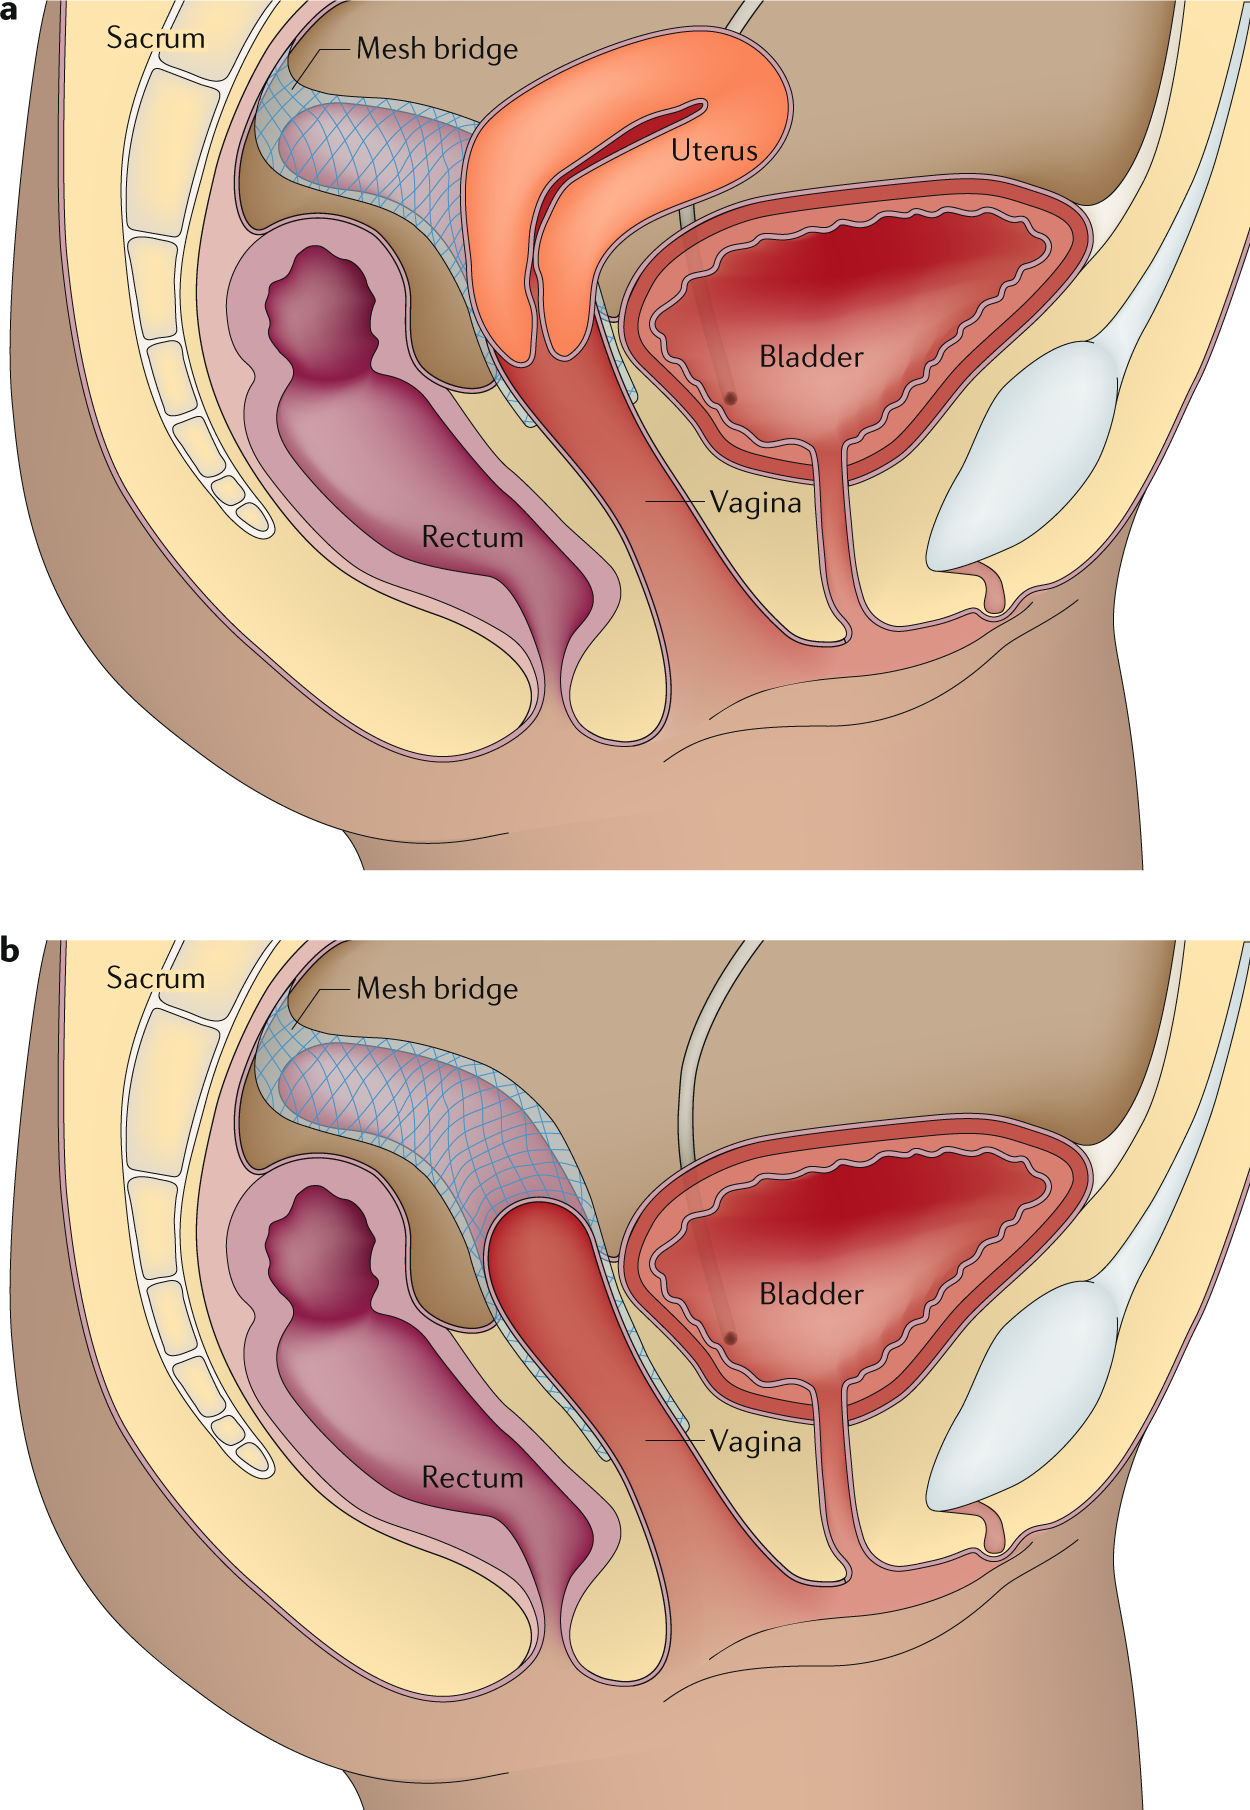 Pelvic organ prolapse and sexual function | Nature Reviews Urology